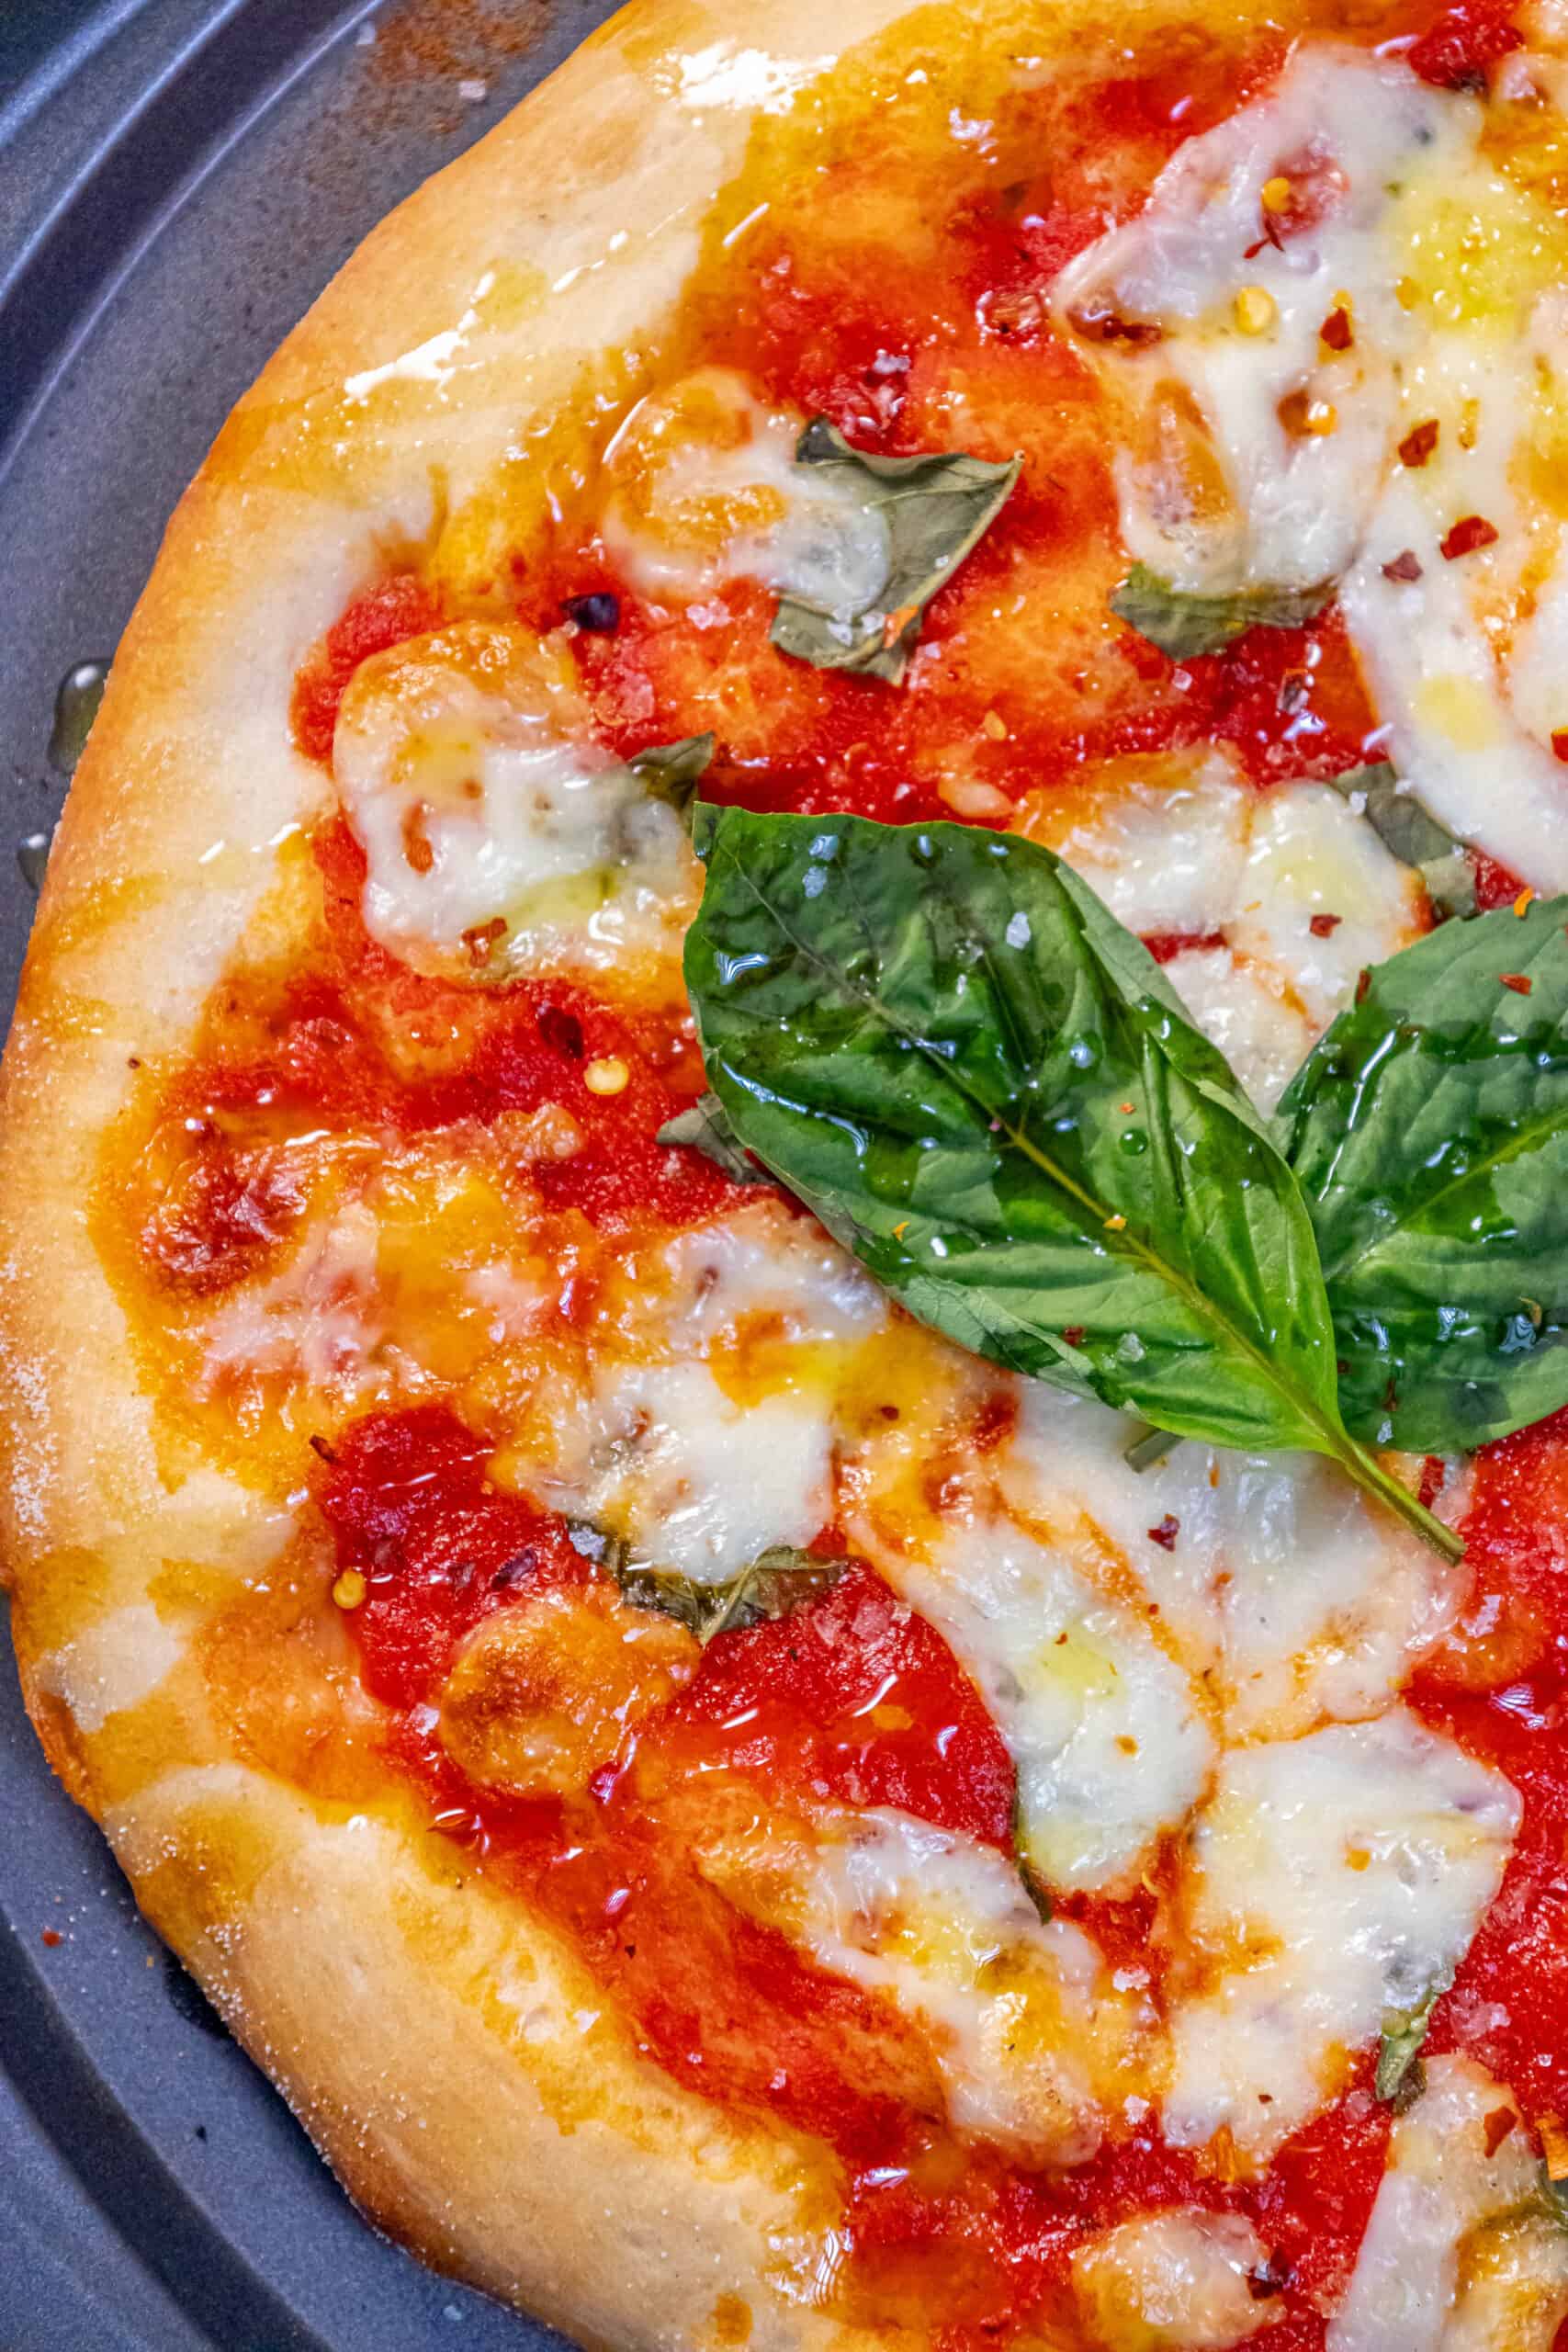 A Margherita pizza on a pan with a basil leaf and sauce.